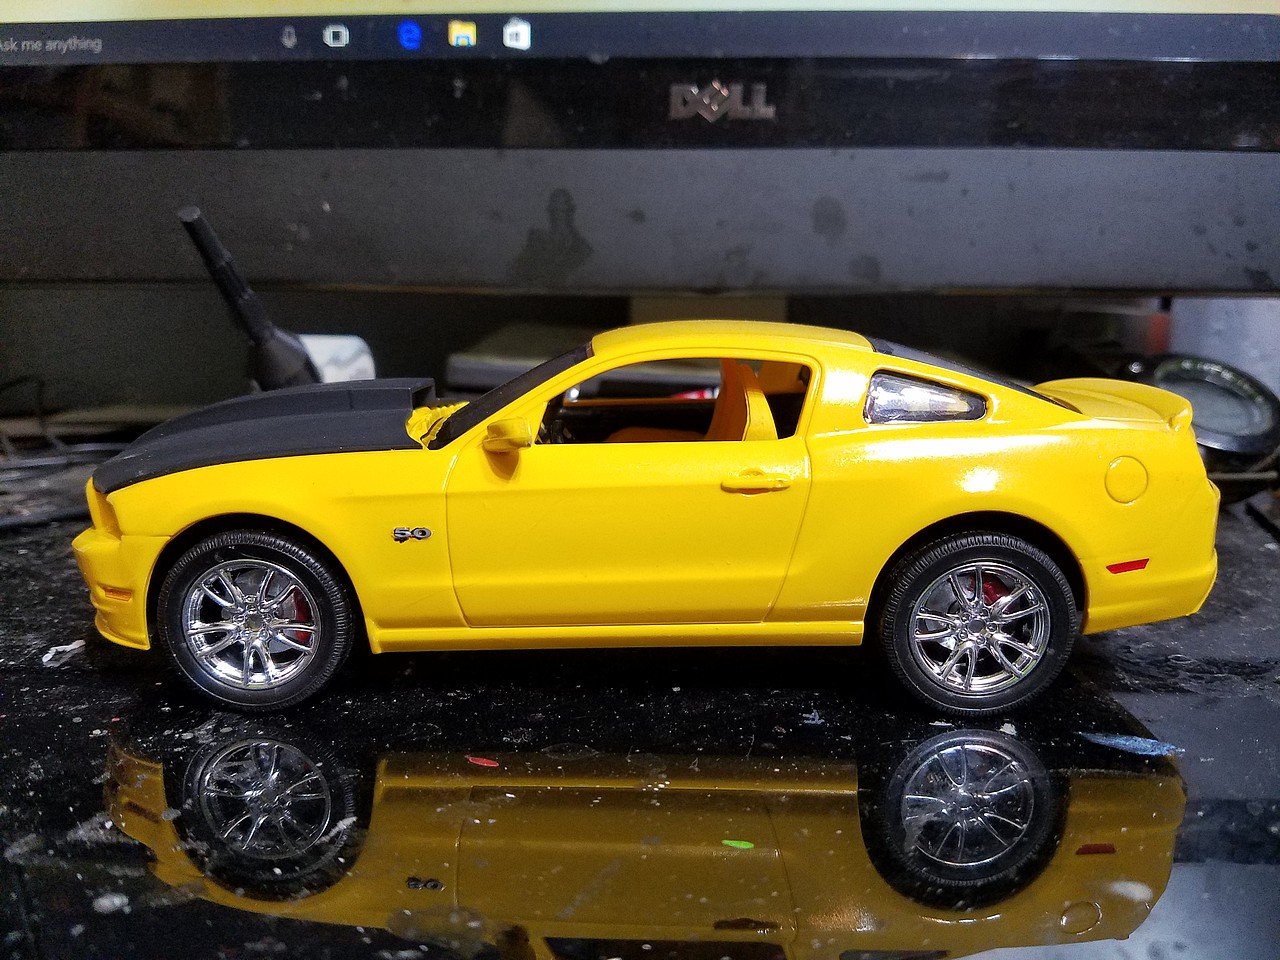 Revell - 7046 - Maquette Voiture - 2010 ford mustang gt